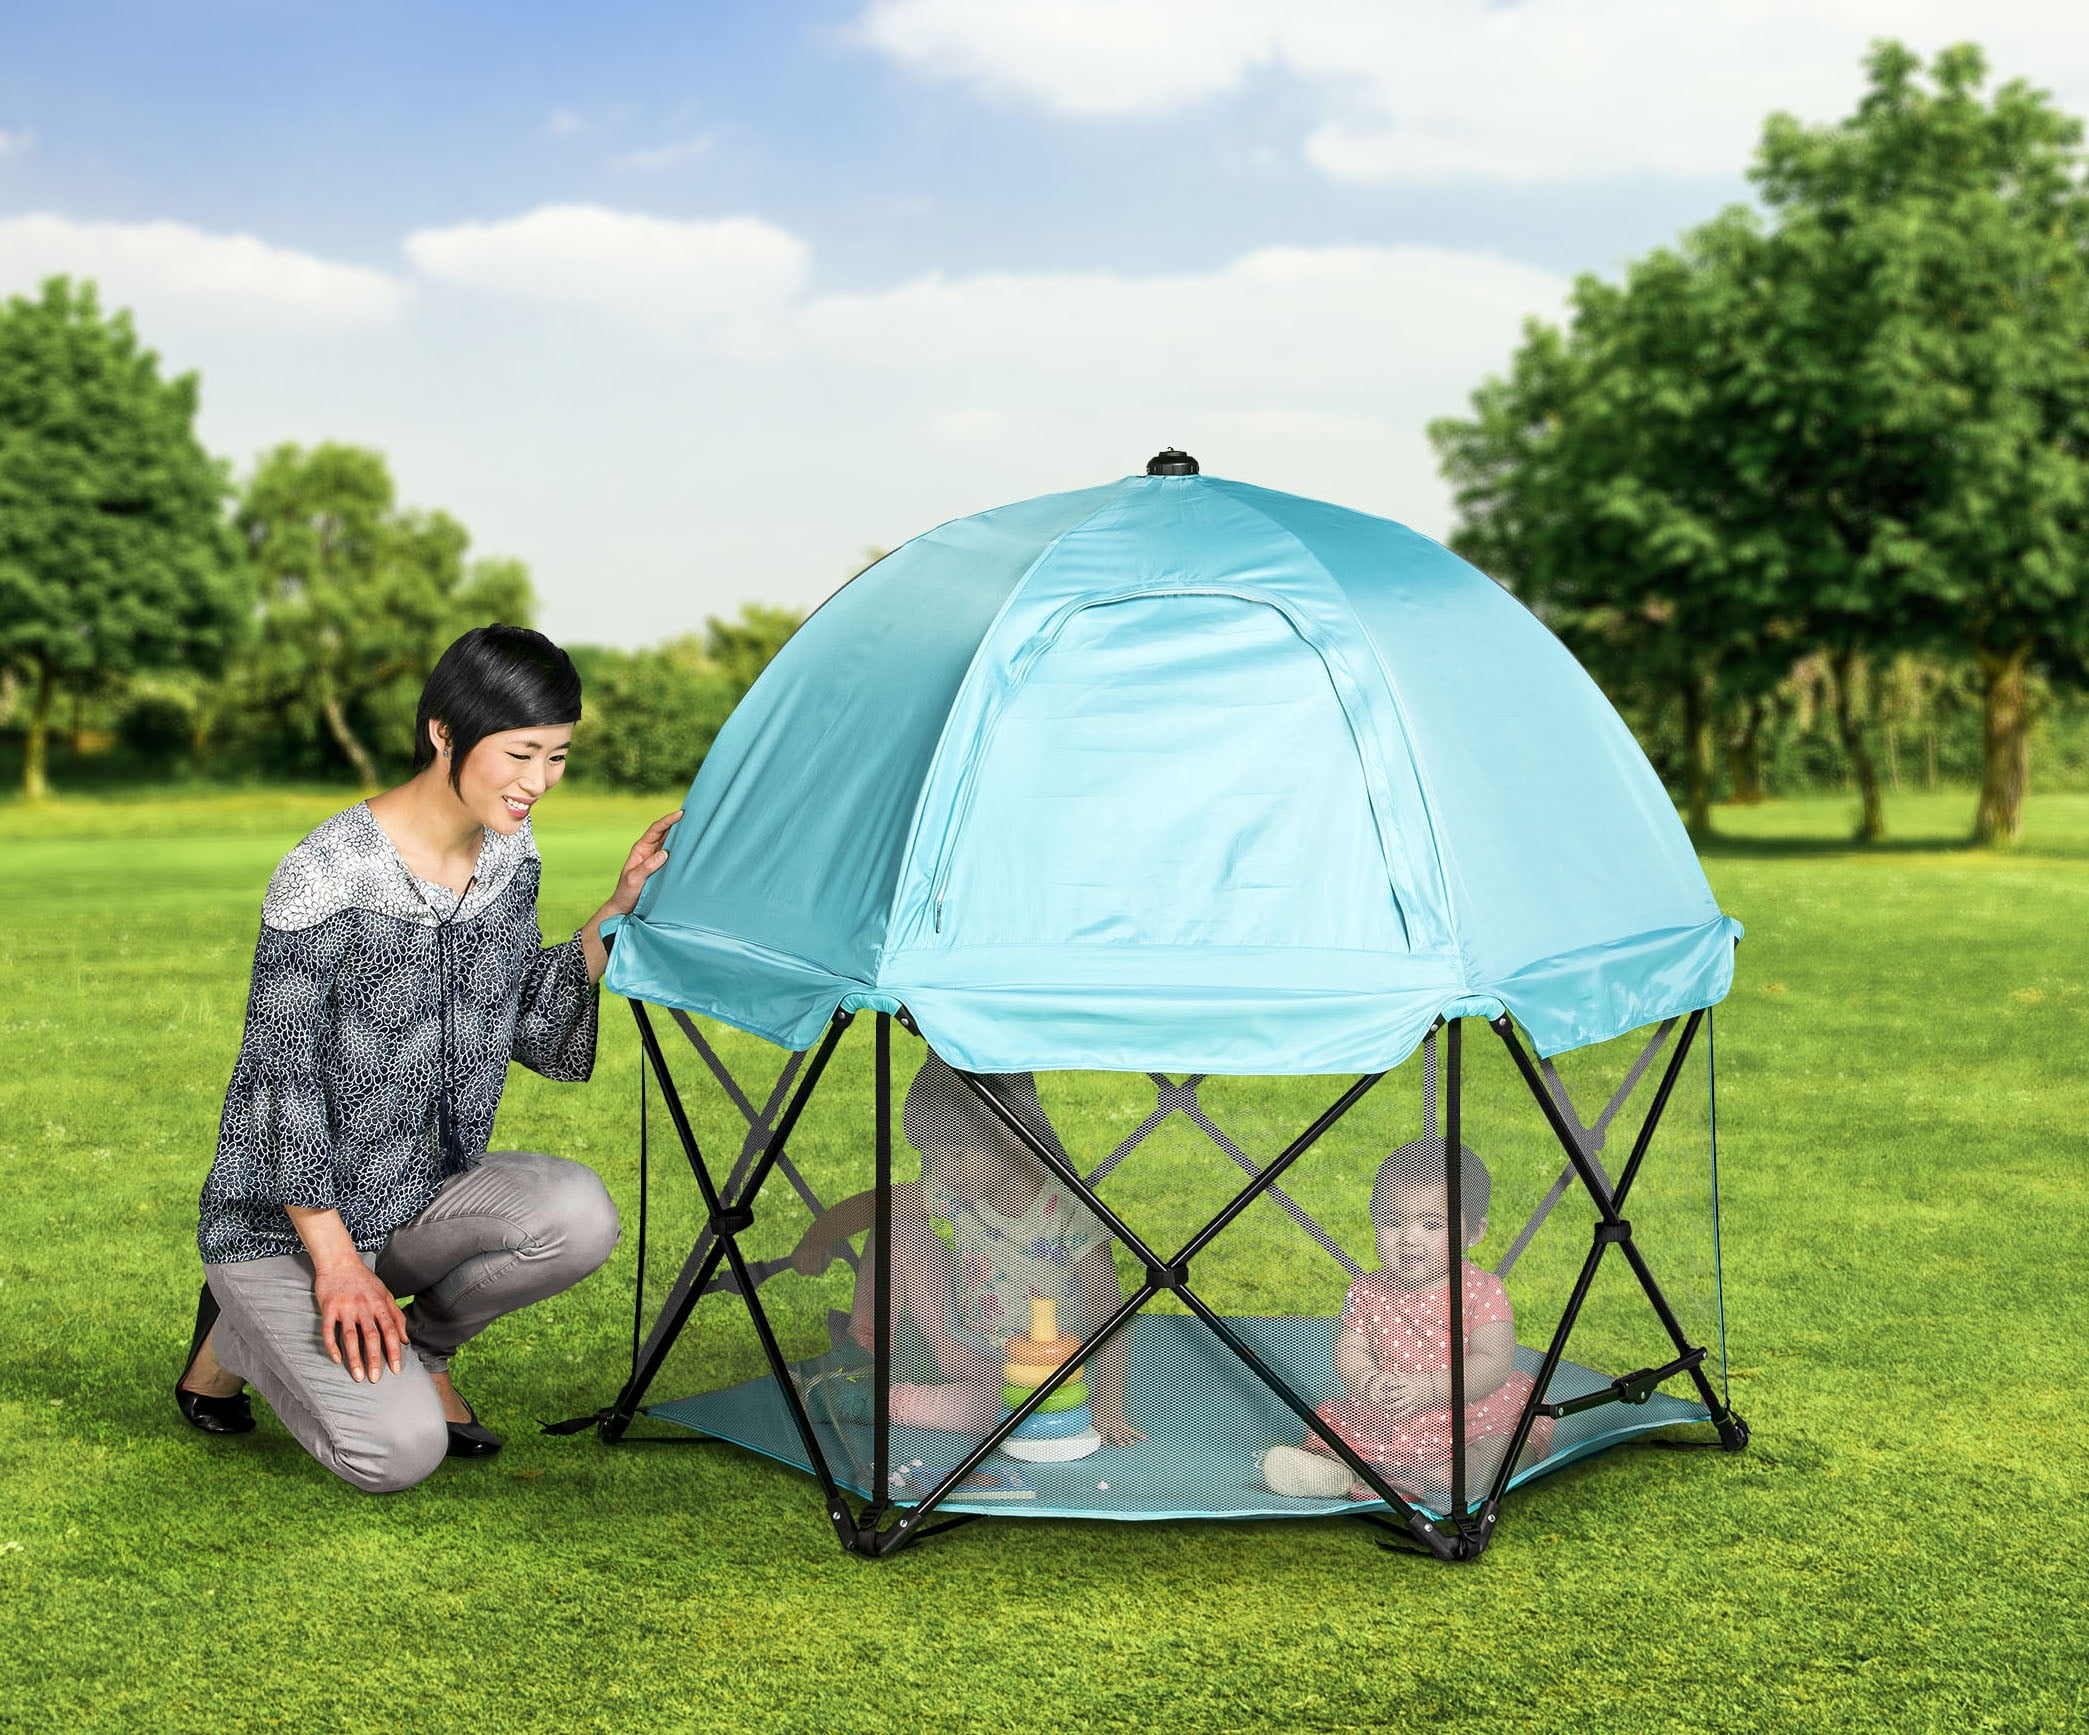 8 panel play yard with canopy